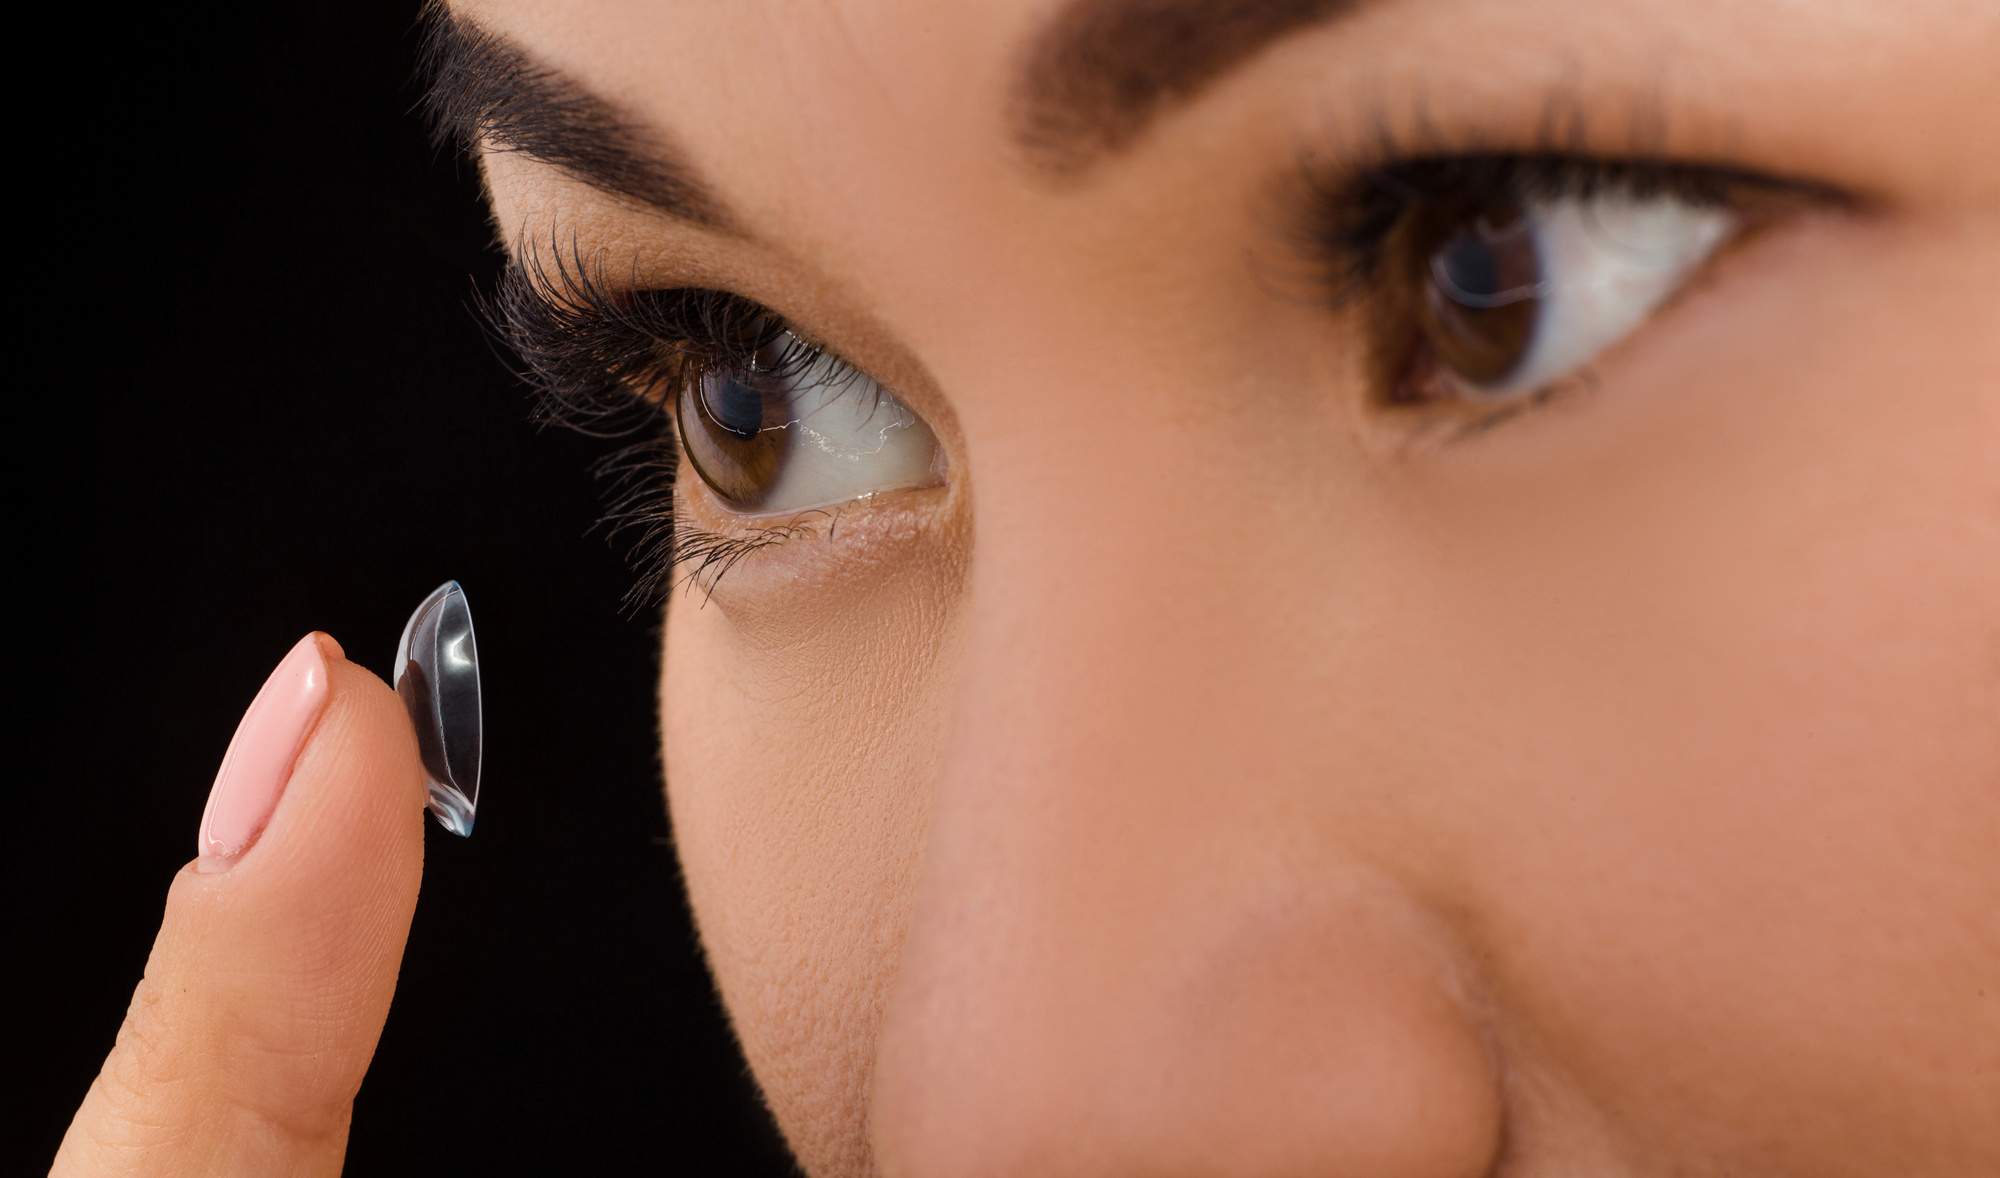 Contact Lenses vs. Glasses: What Are the Differences?